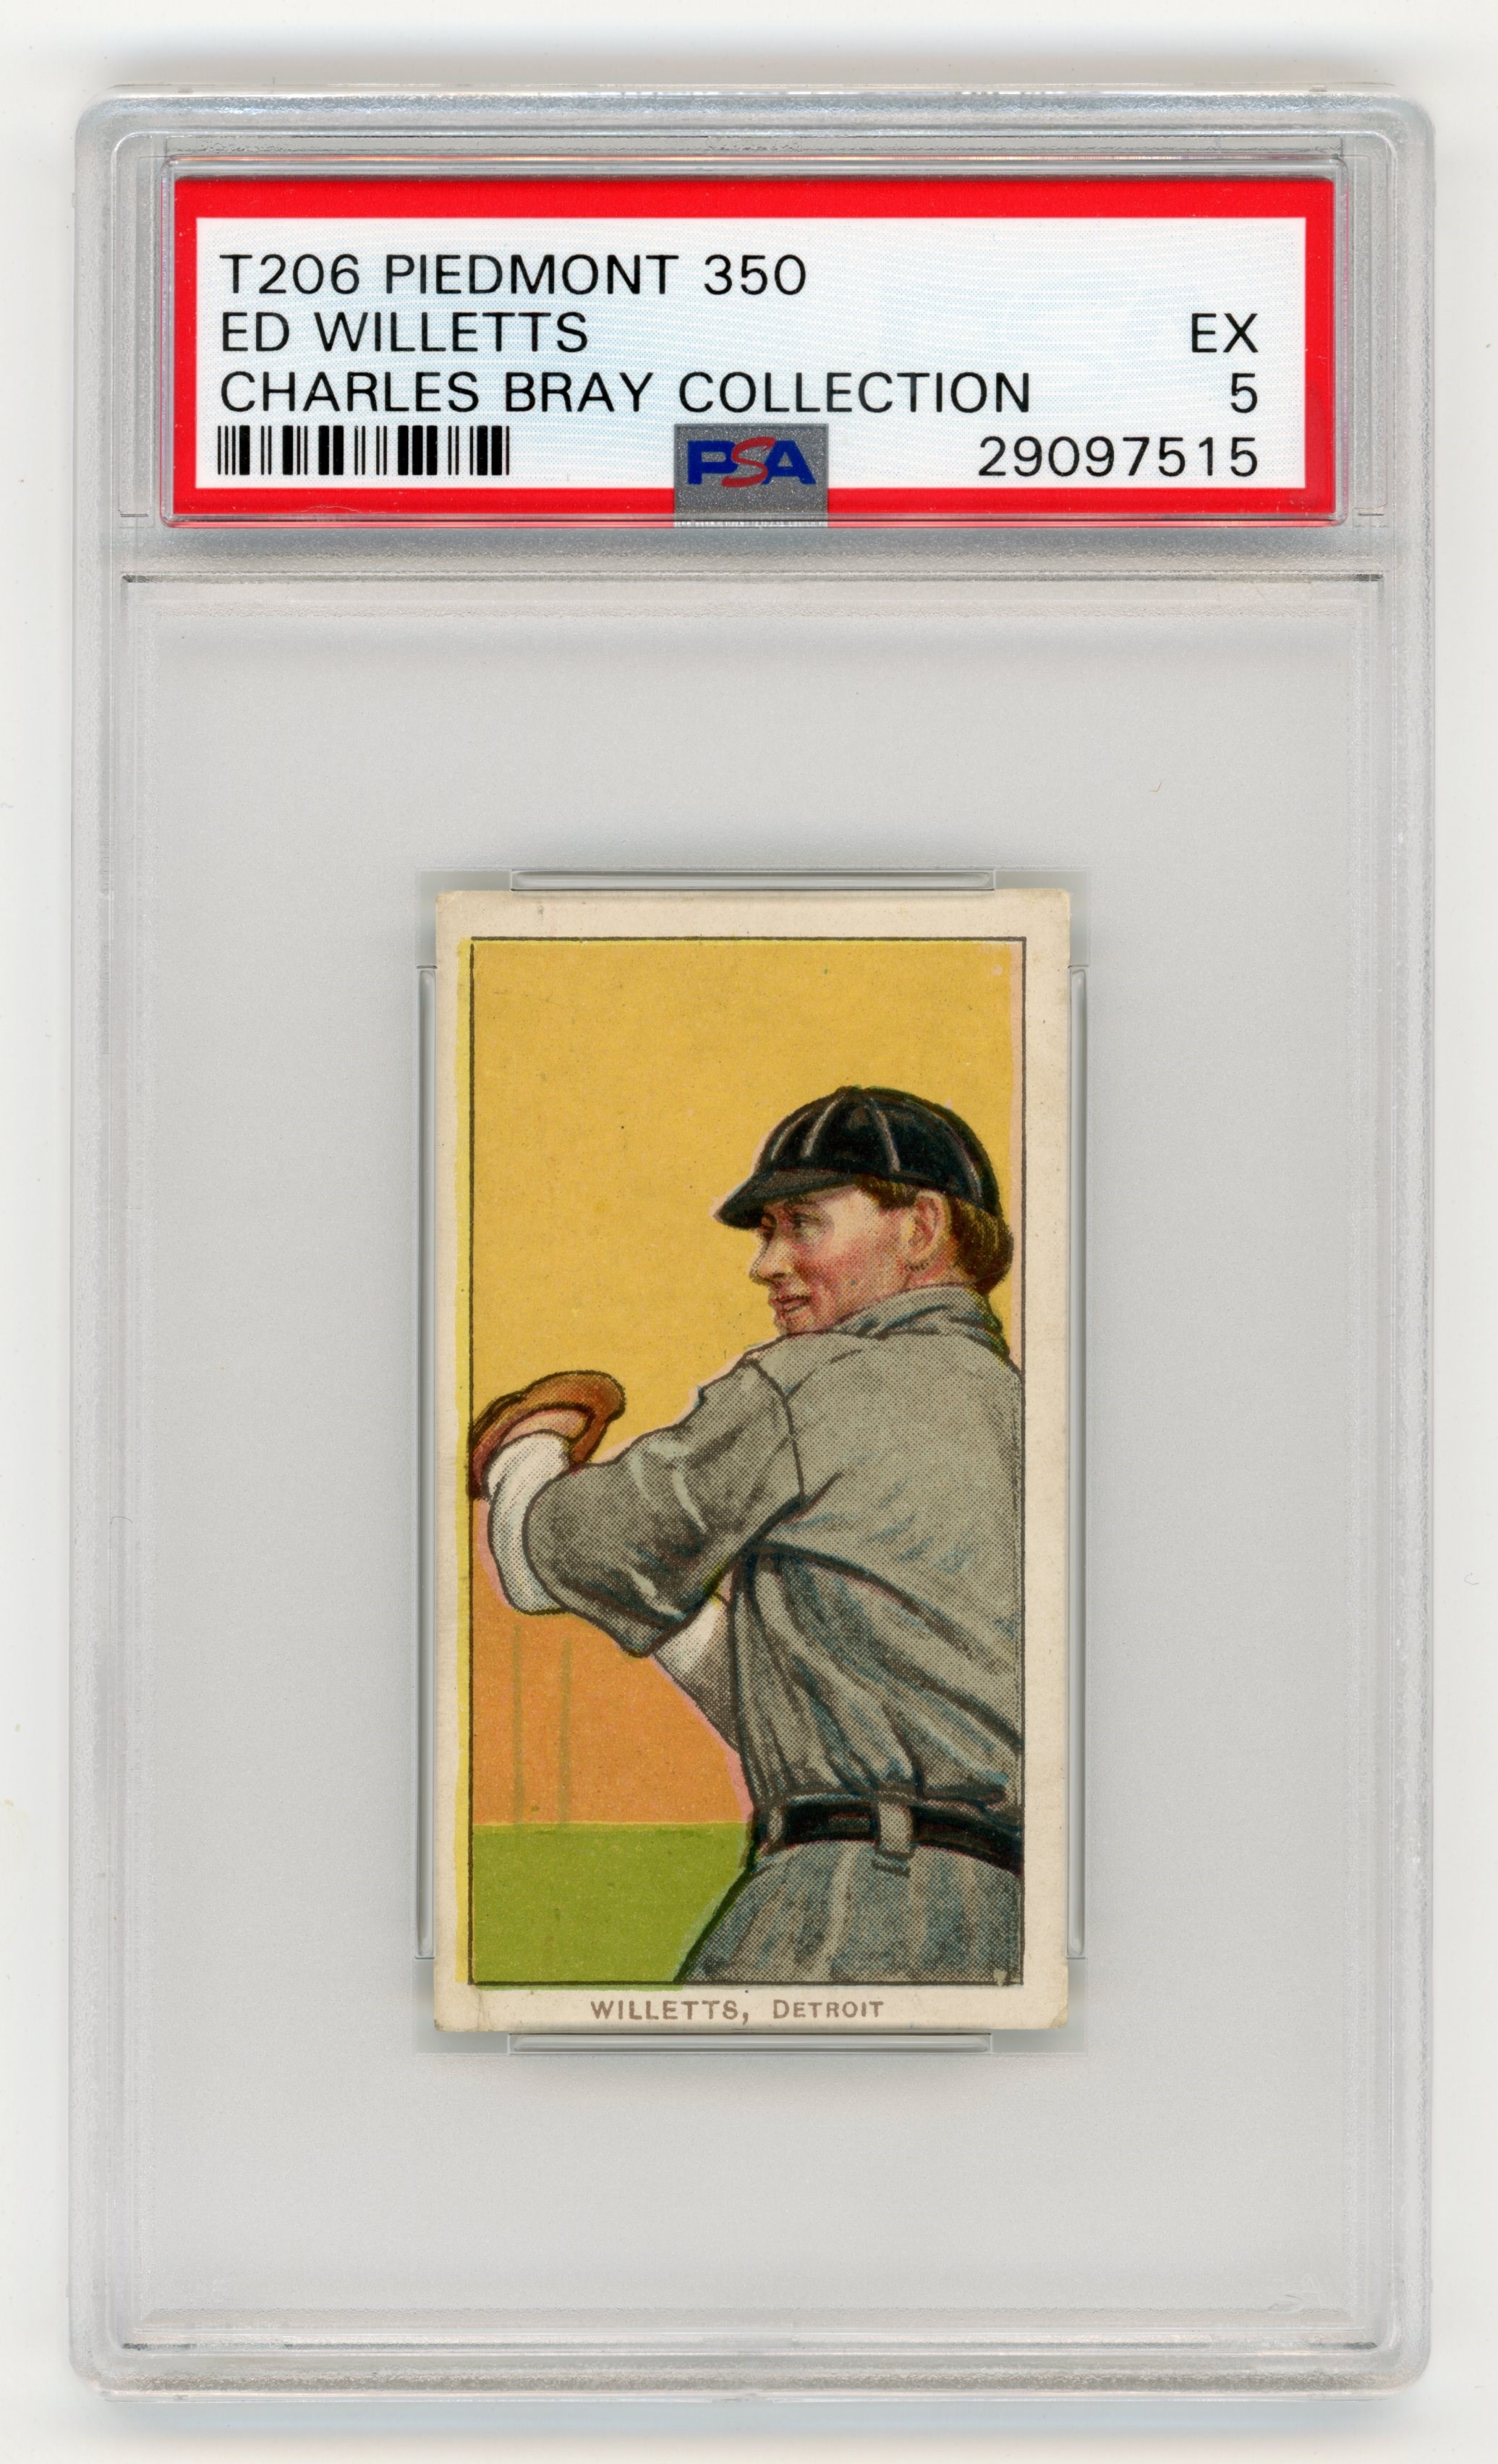 Baseball and Trading Cards - T206 Piedmont 350 Ed Willetts PSA 5 From Charles Bray Collection